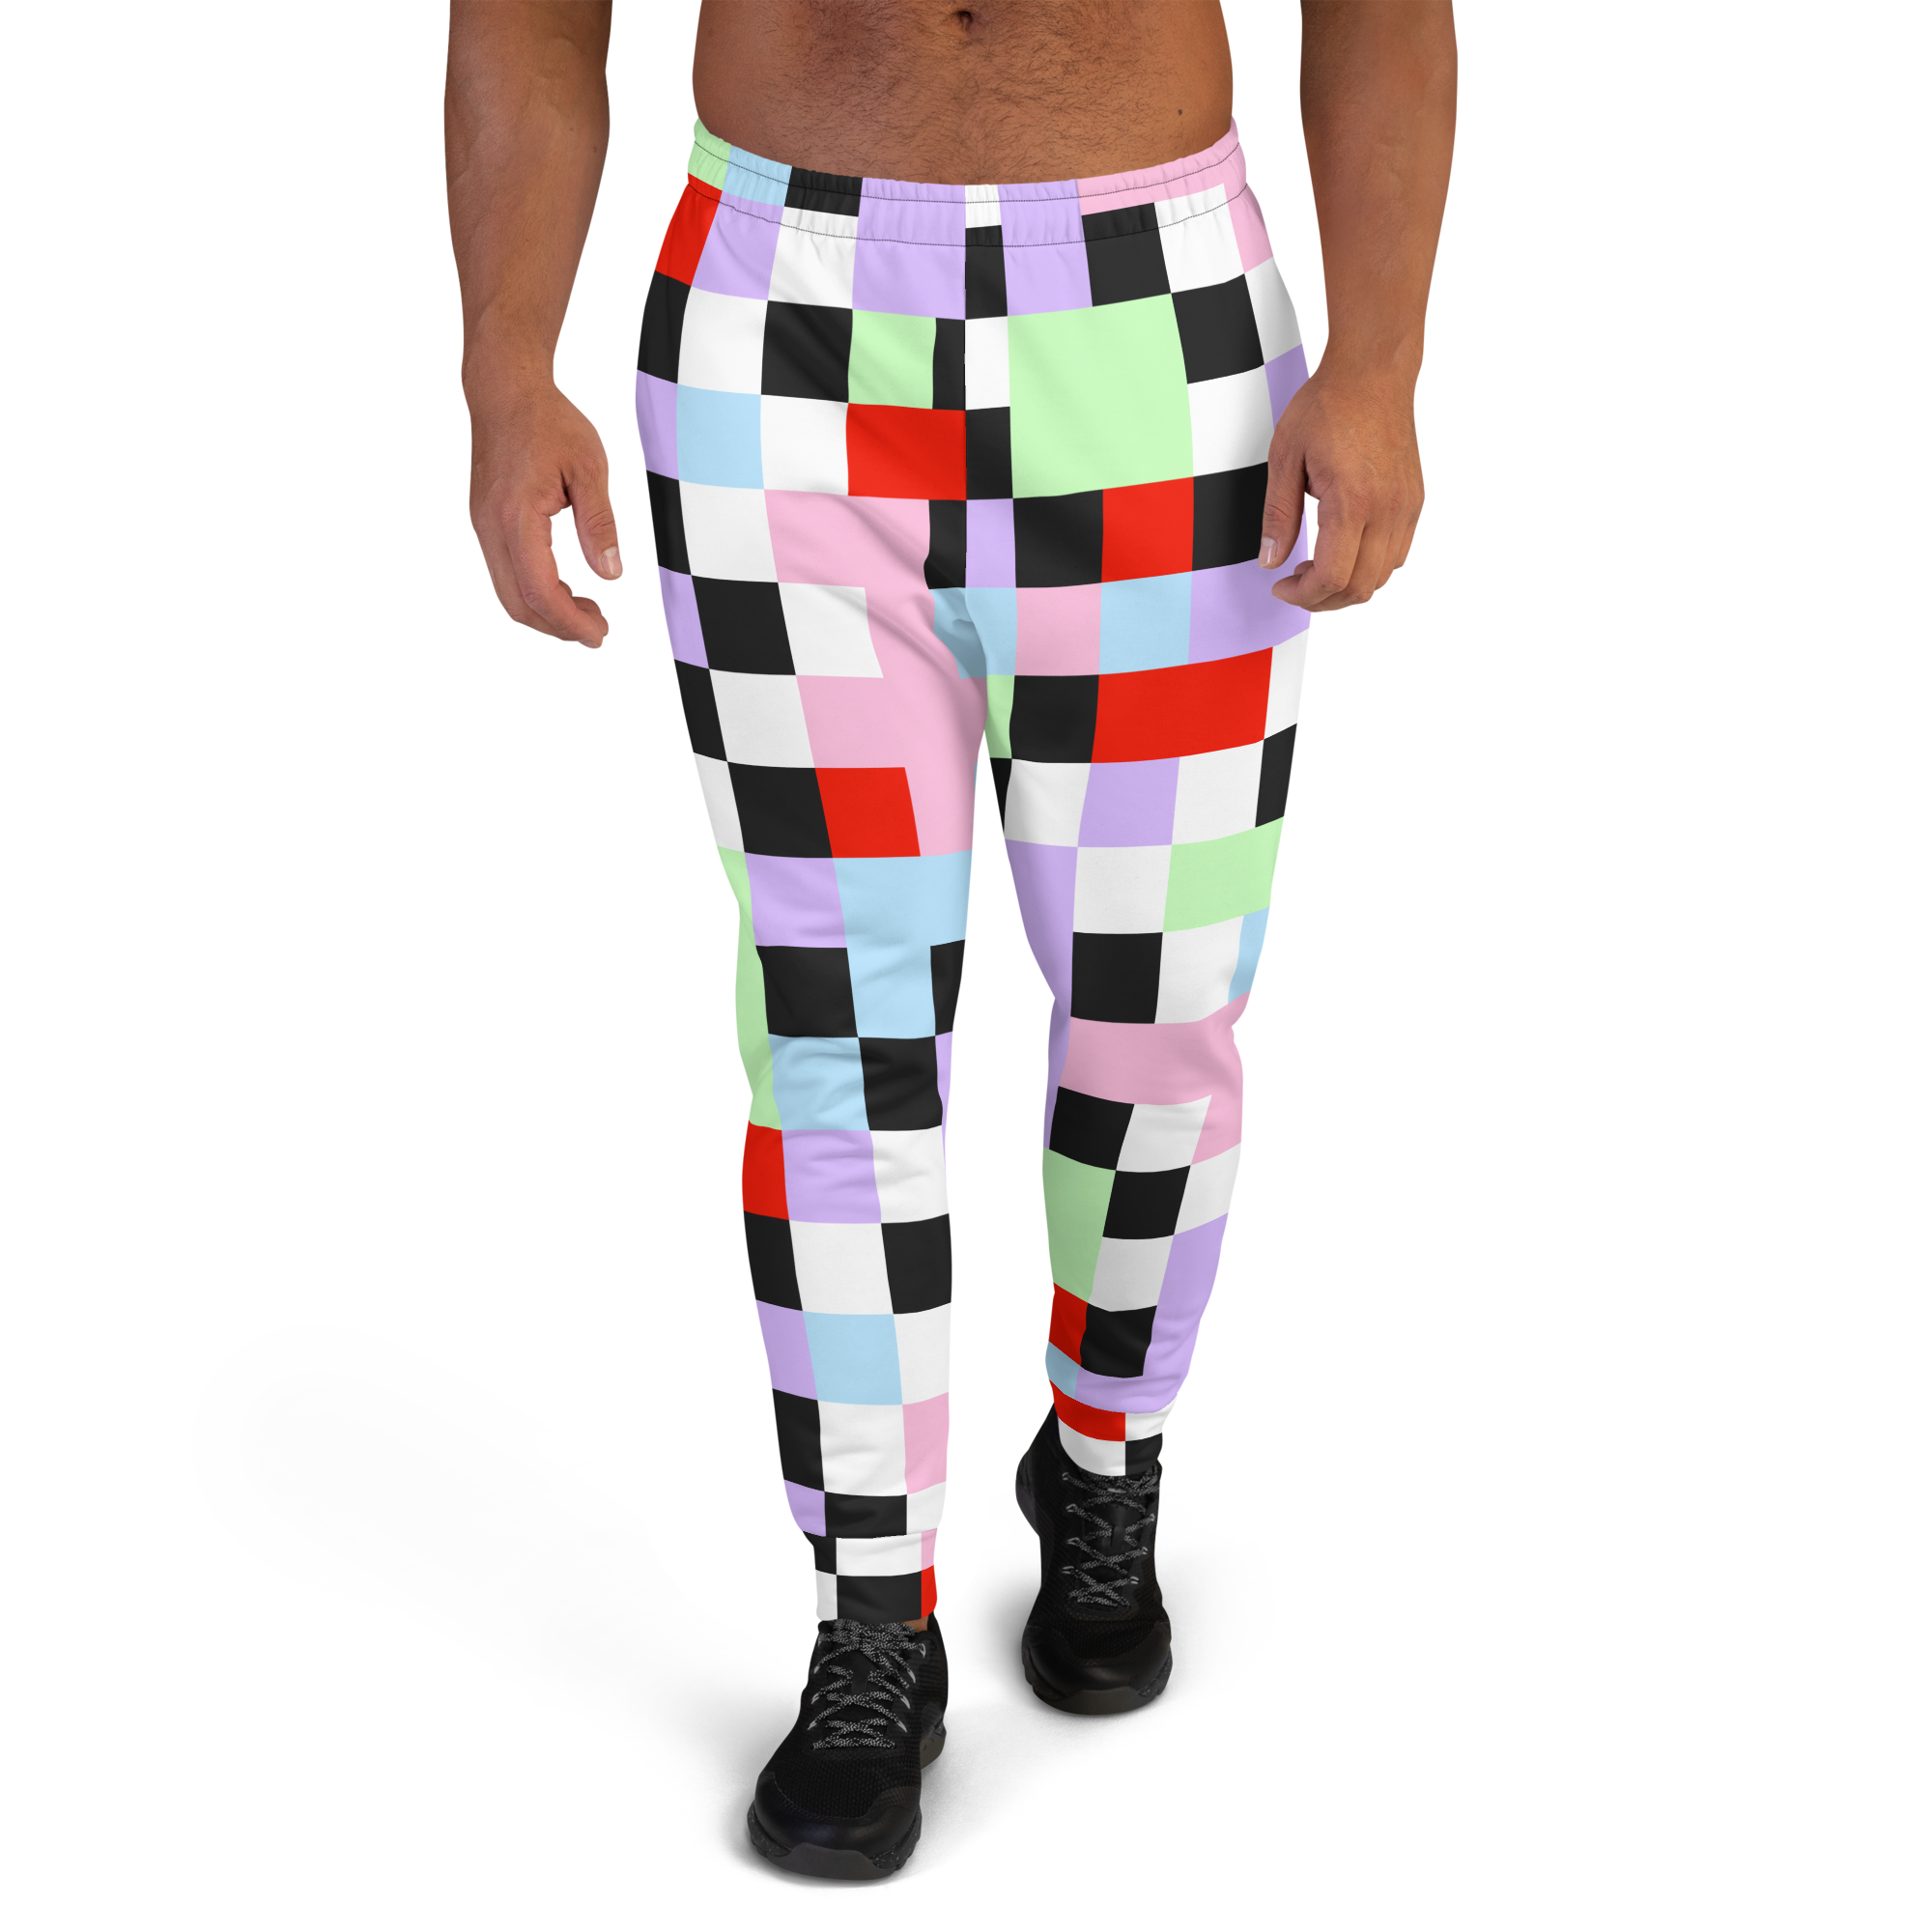 Pastel goth Harajuku themed men's joggers in chequered pattern of purple, green, pink, blue, red, black and white on these tracksuite bottoms by BillingtonPix